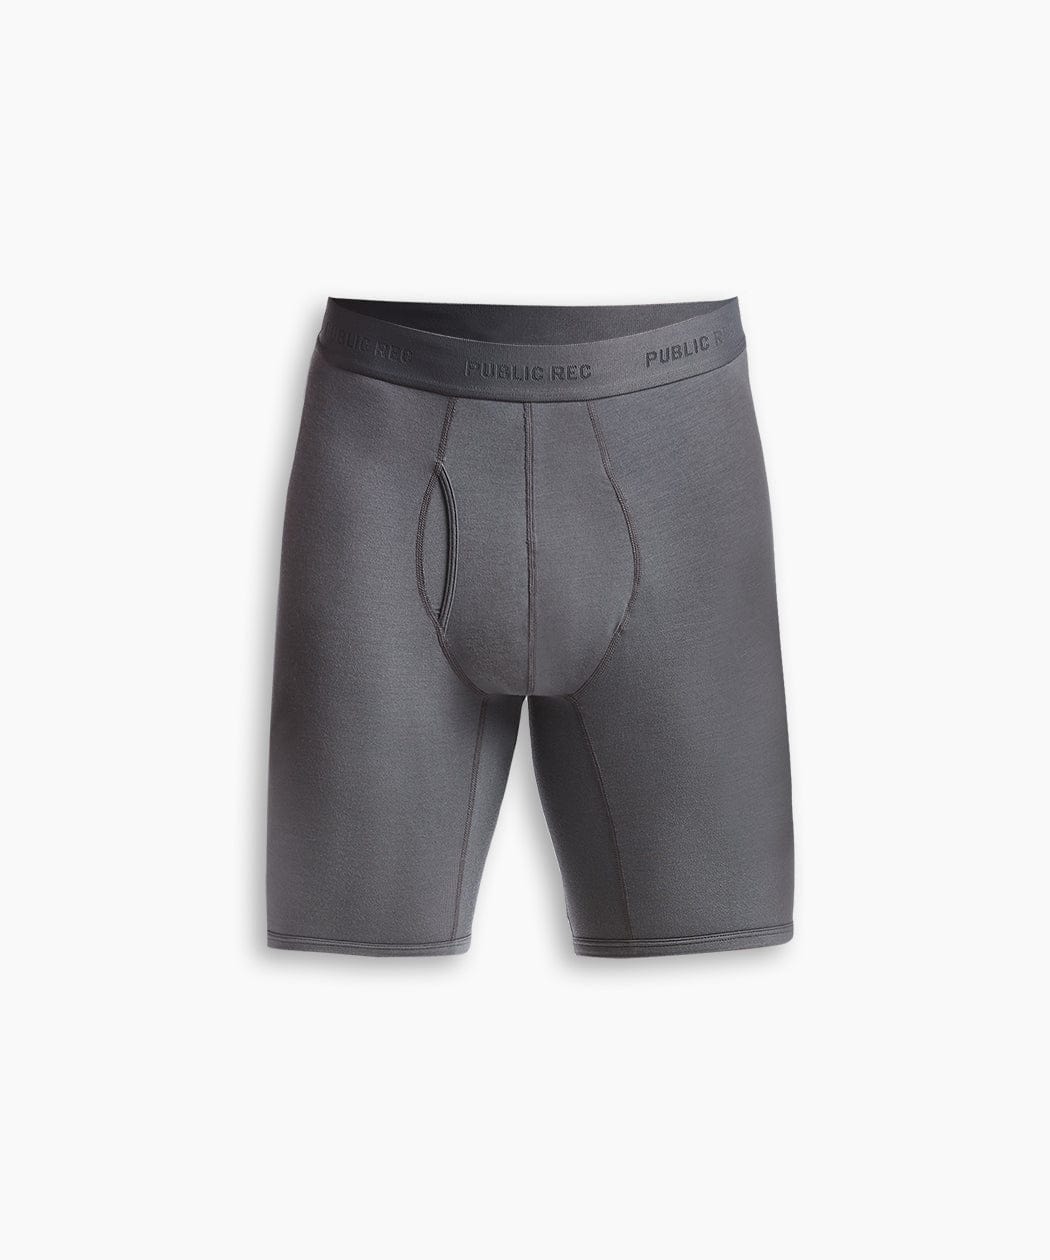 Barely There Boxer Brief, Men's Black